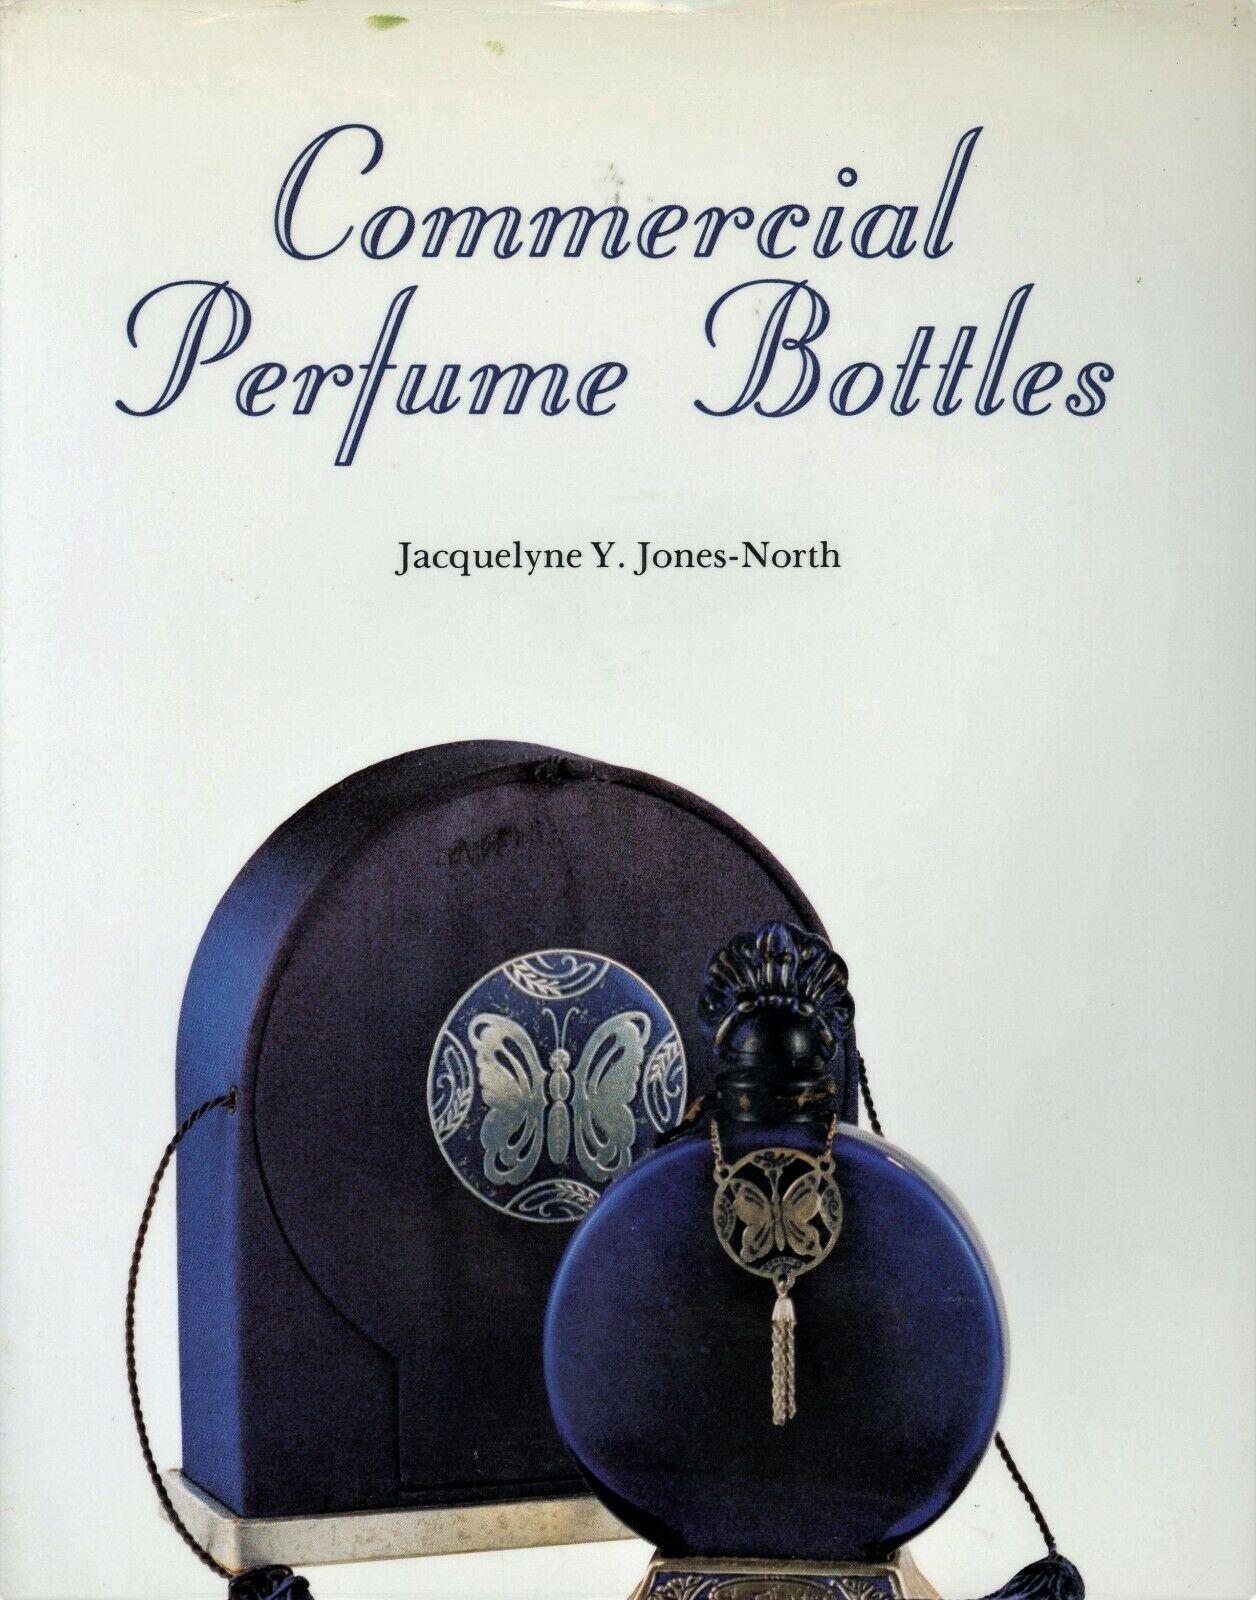 Antique Commercial Perfume Bottles 850 Pictures / Massive Illustrated Book